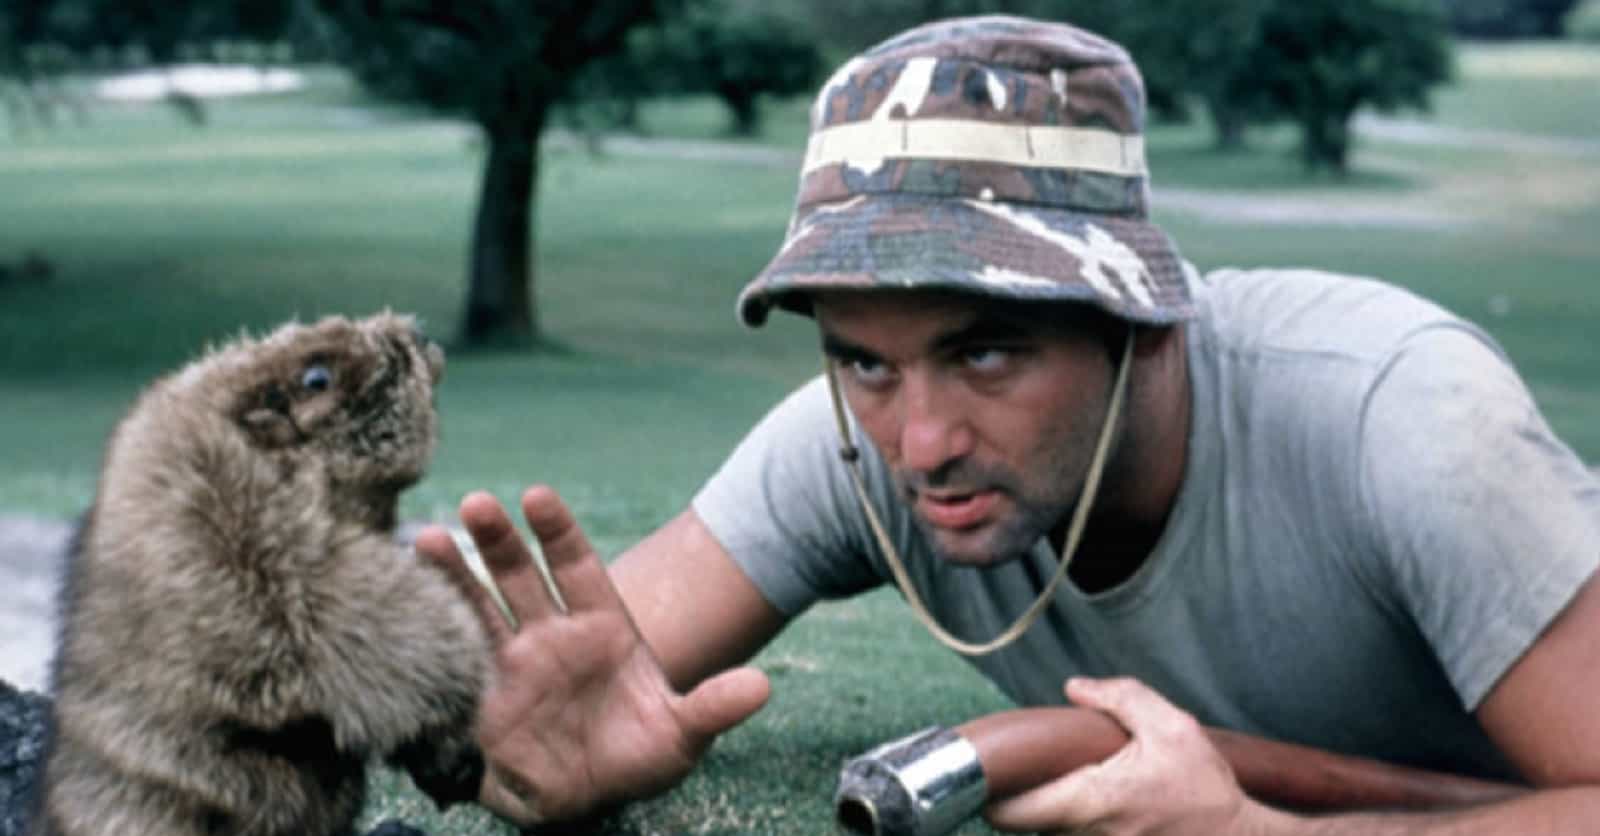 Drug-Fueled Stories From Behind The Scenes Of 'Caddyshack'